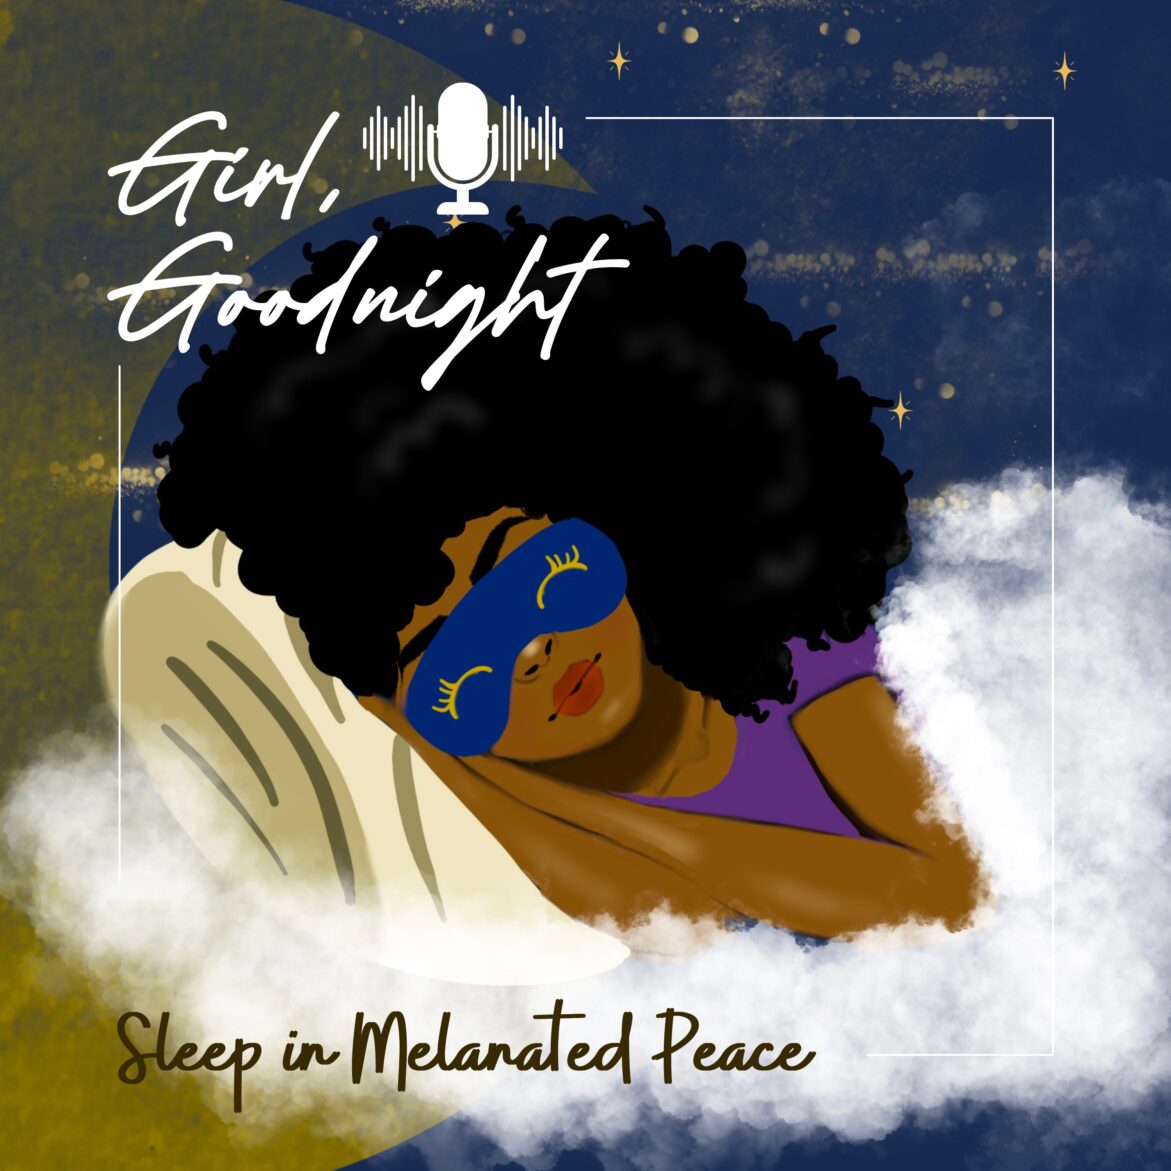 Black Podcasting - The Girl, Goodnight Cap-This Is Healing pt 1